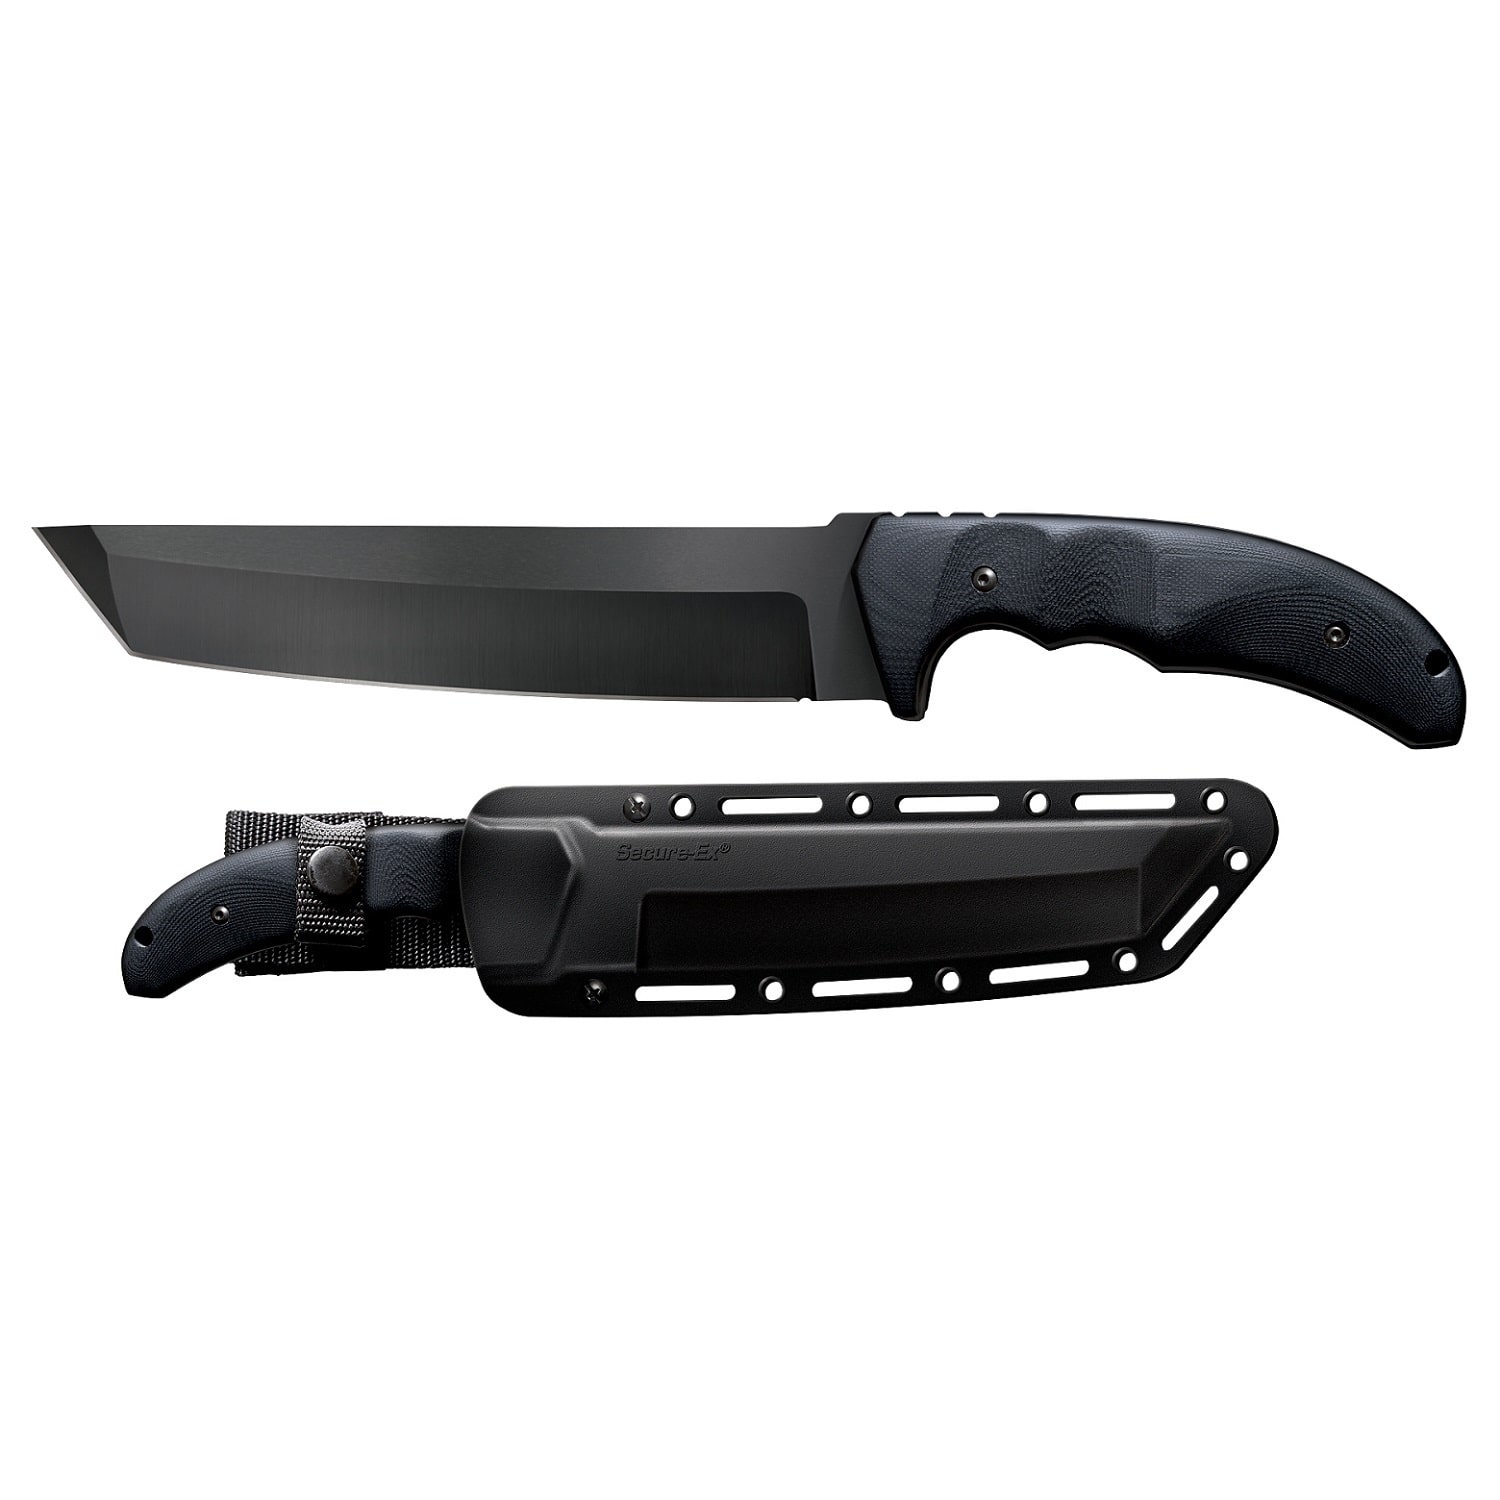 Cold Steel 7.5" Tanto Tactical Knife - image 3 of 5